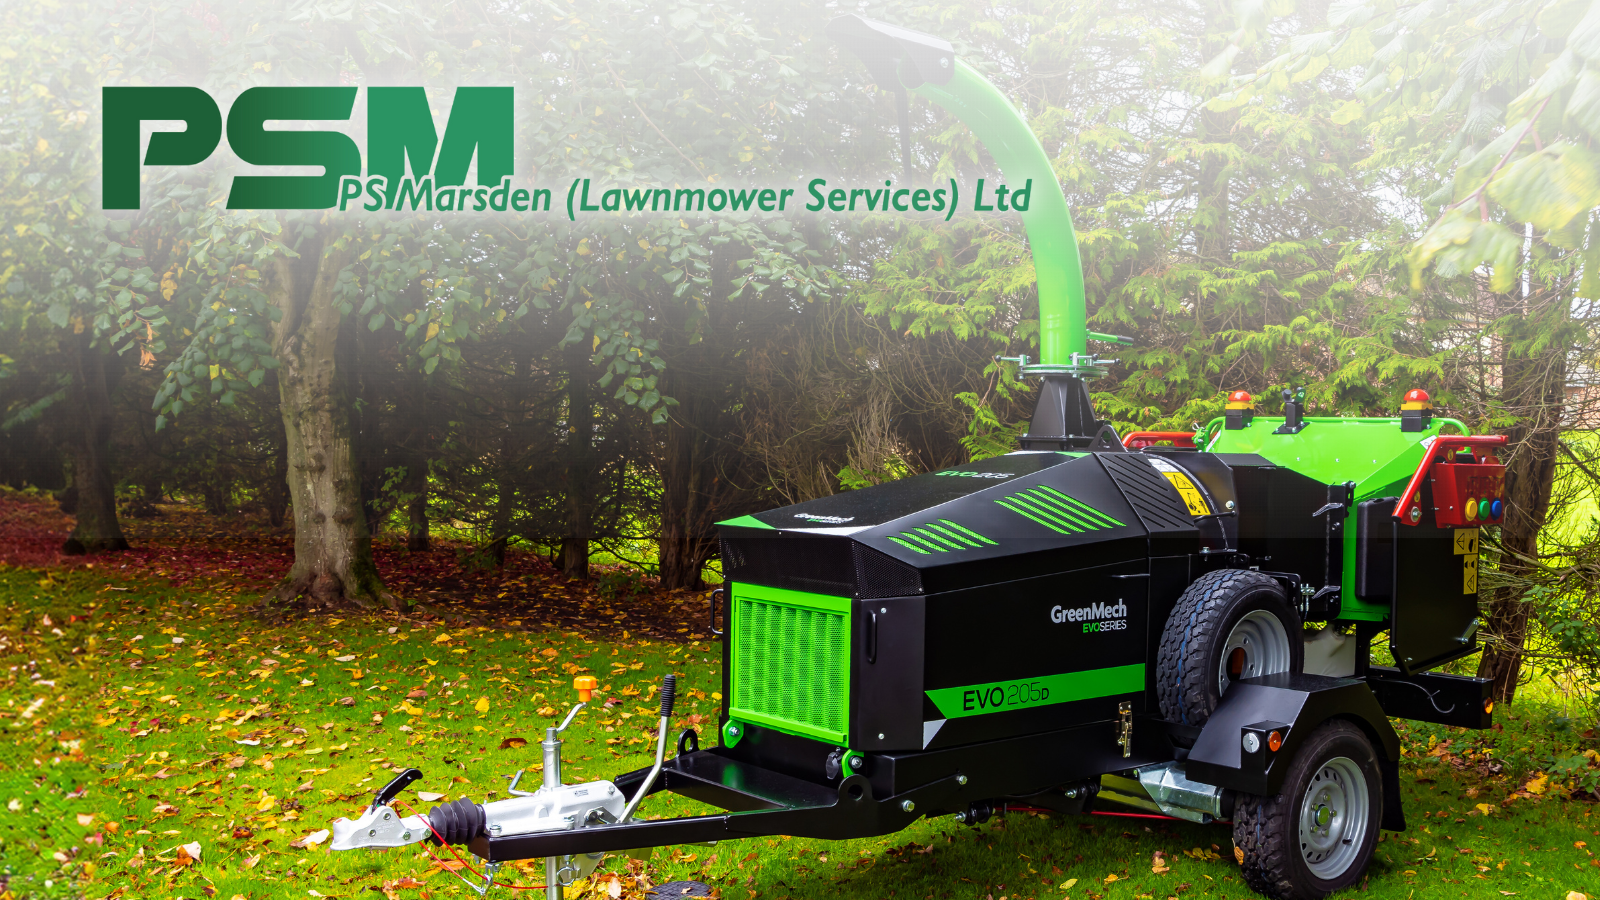 GreenMech welcomes PS Marsden (Lawnmower Services) Ltd to distribution network